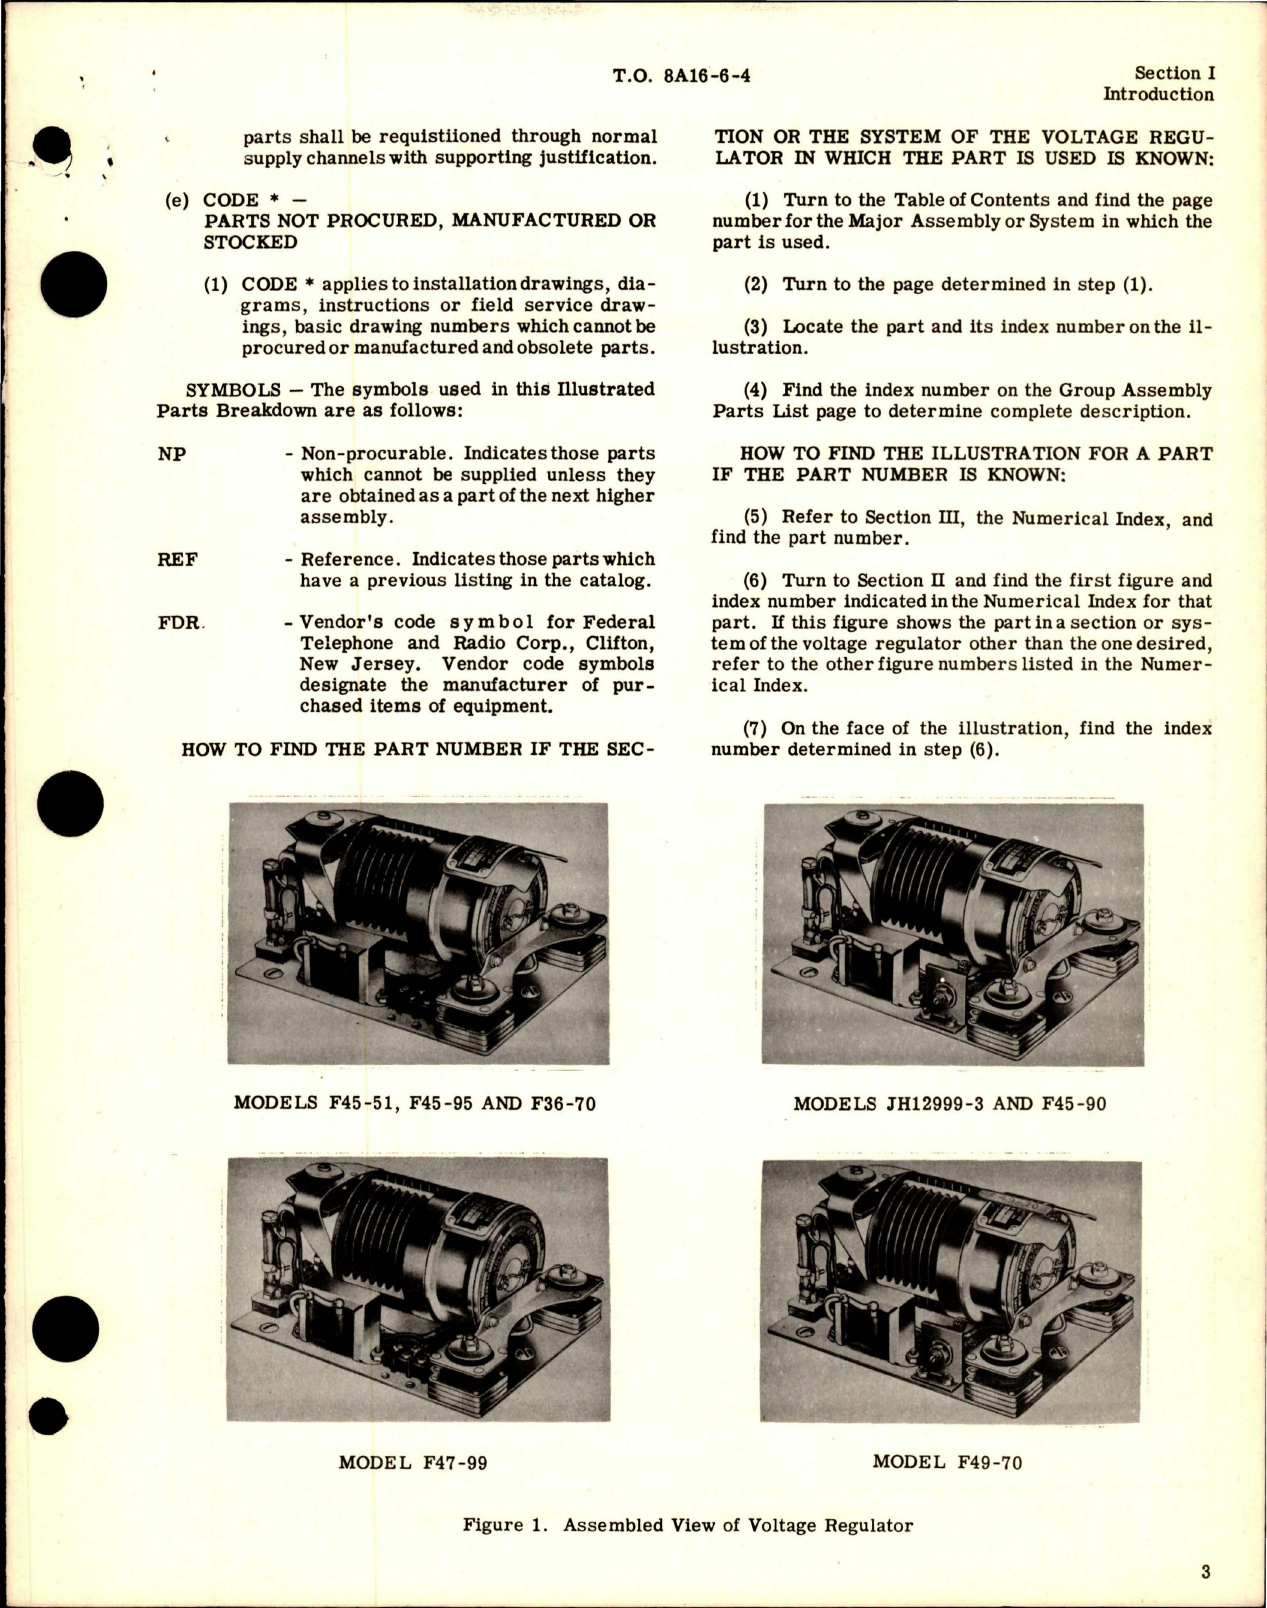 Sample page 5 from AirCorps Library document: Illustrated Parts Breakdown for Voltage Regulators 